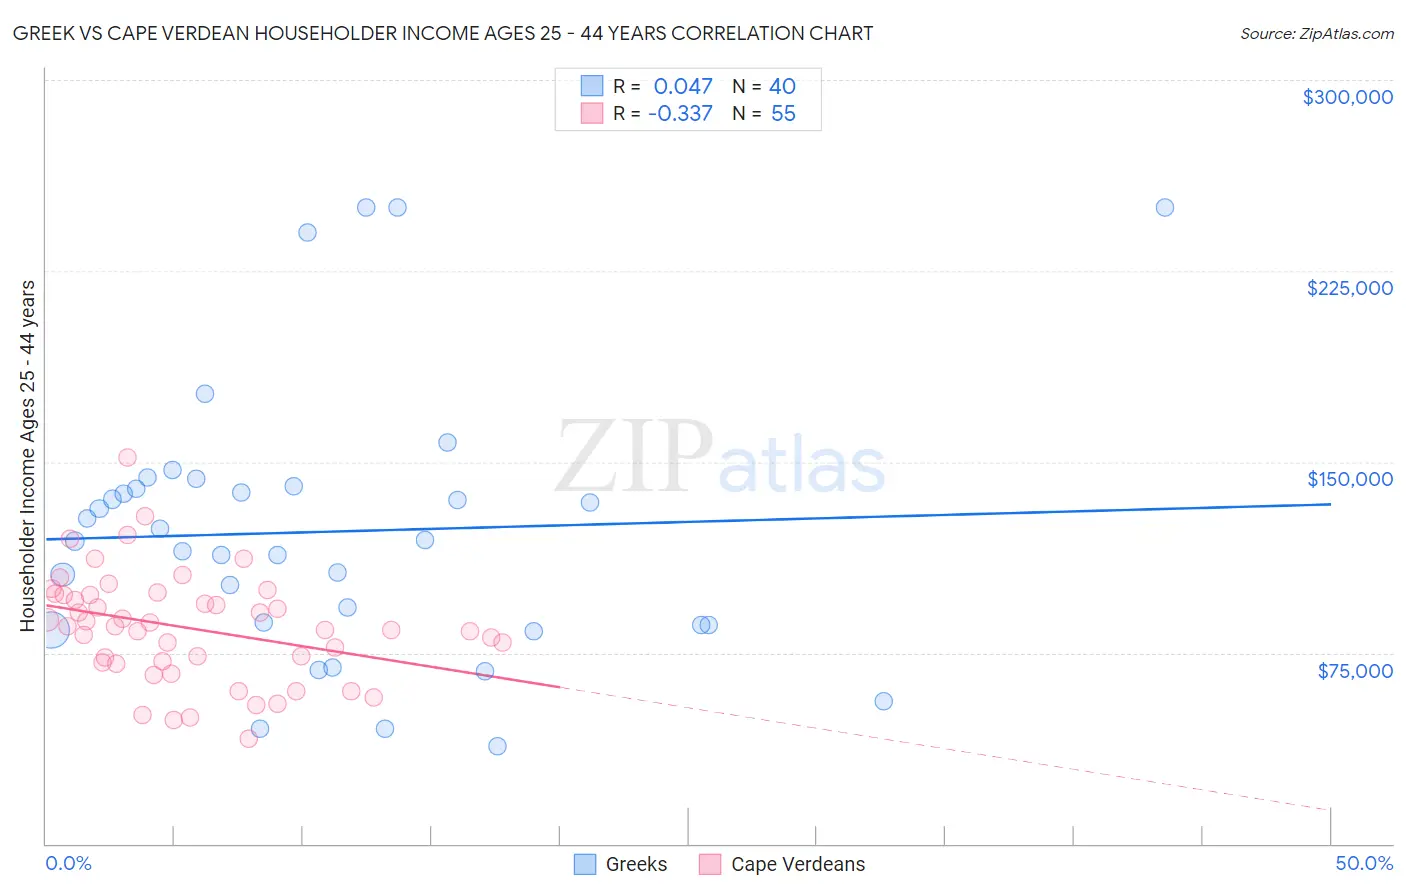 Greek vs Cape Verdean Householder Income Ages 25 - 44 years